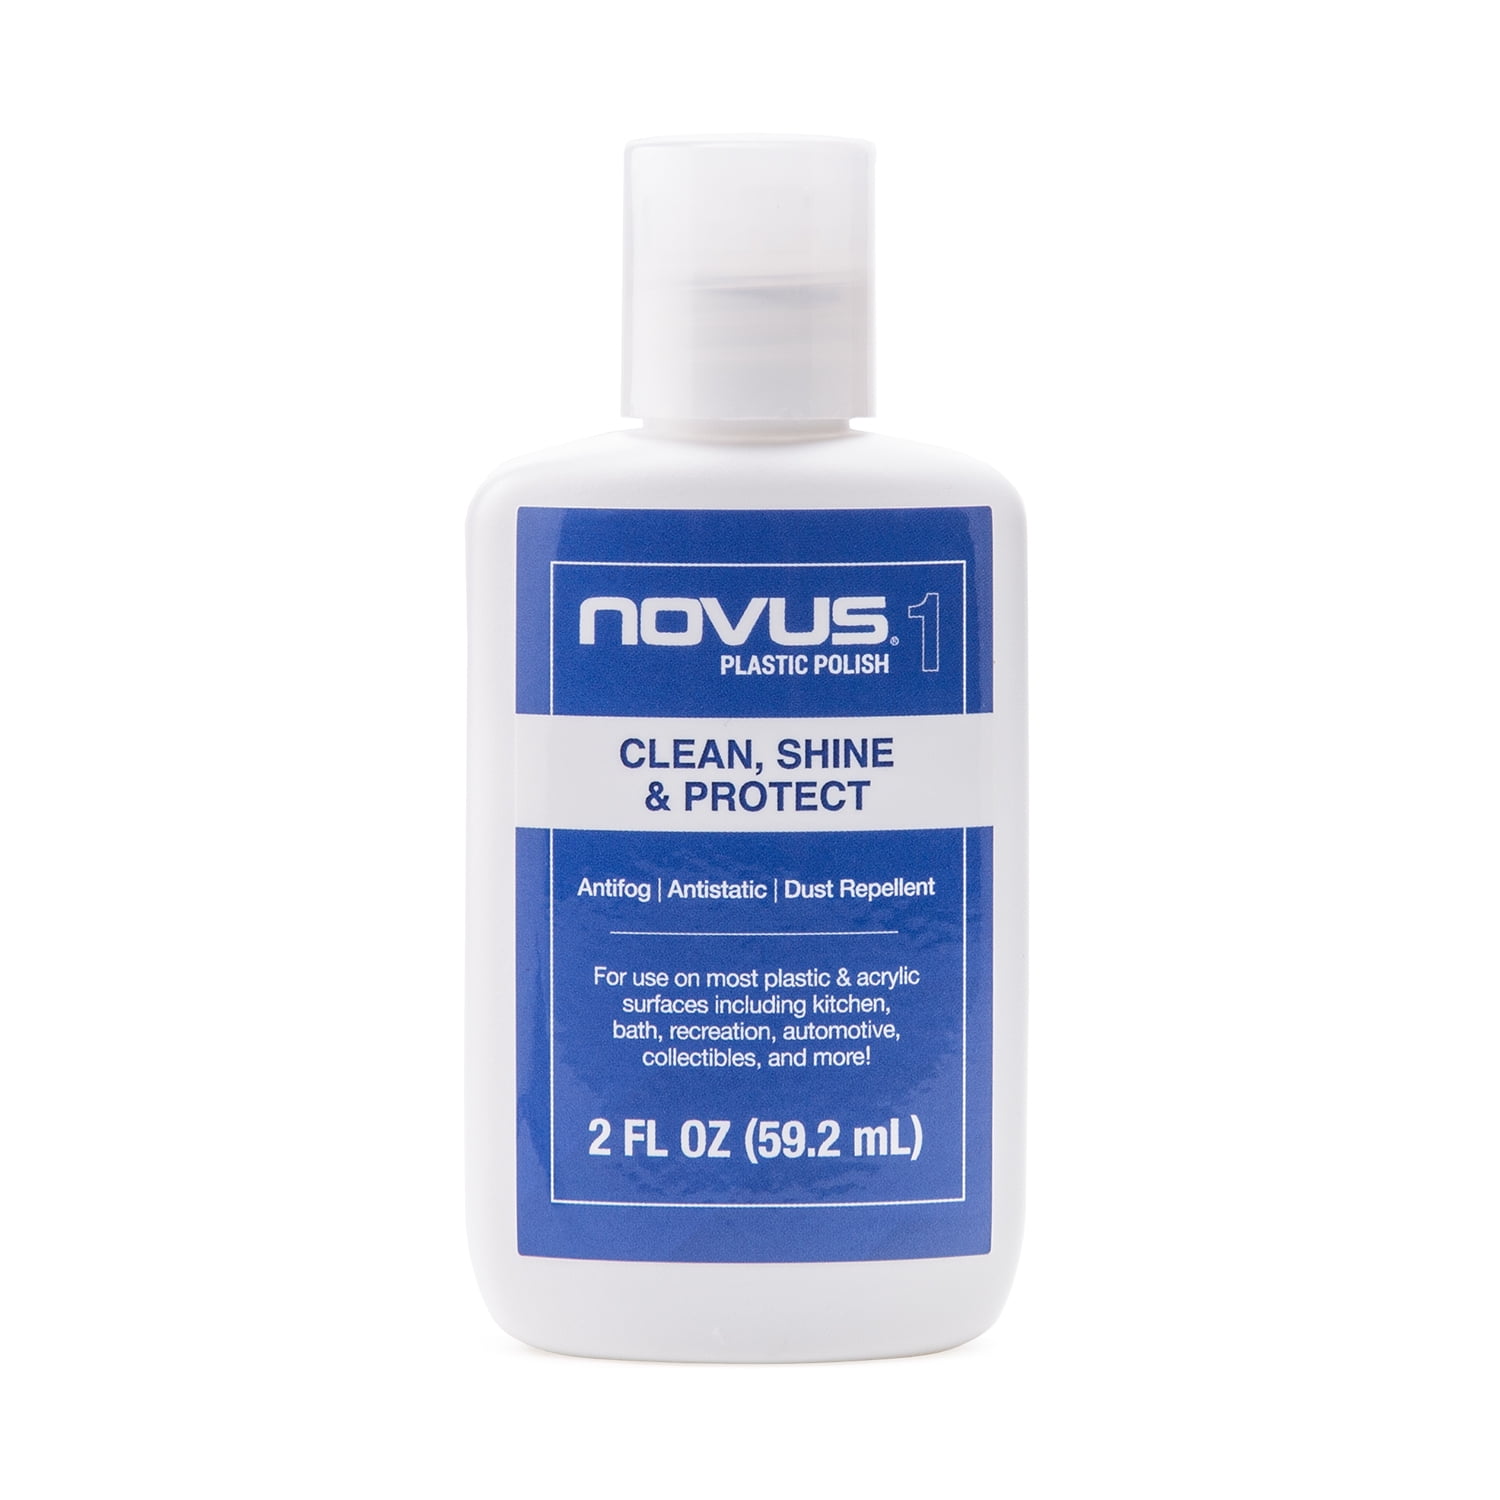 Aquatech Novus Cleaning / Scratch Remover Kit New-In-Box at